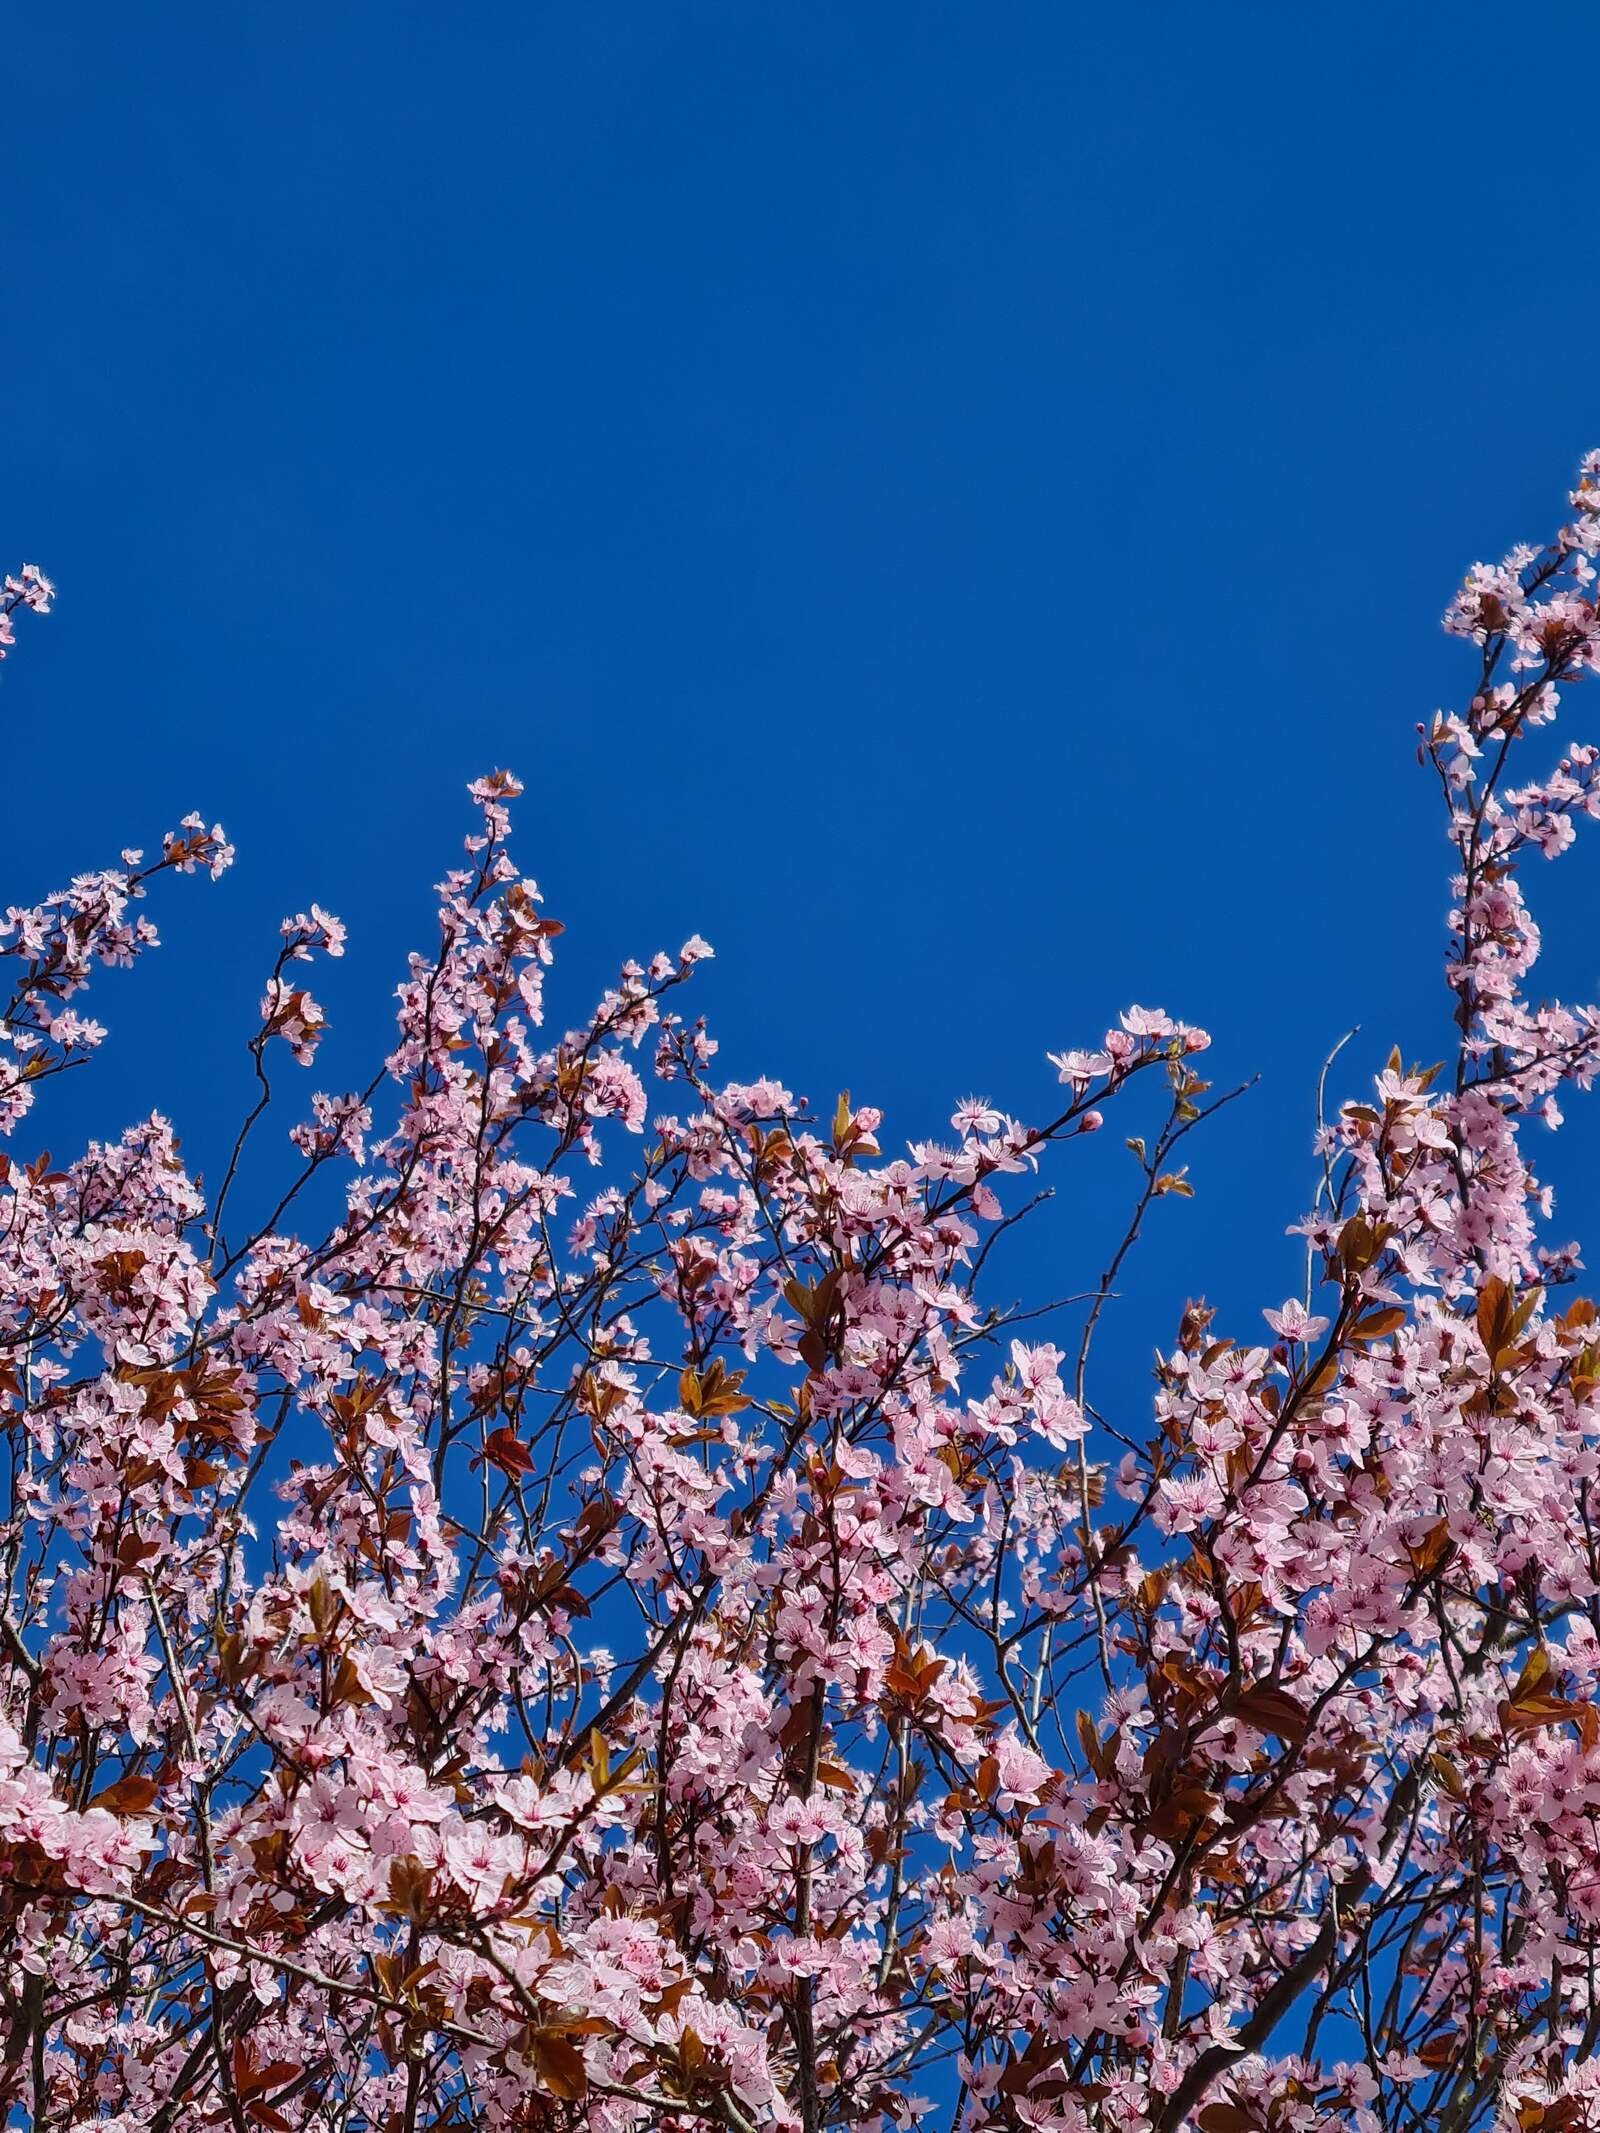 pink cherry blossoms on a tree with blue sky behind